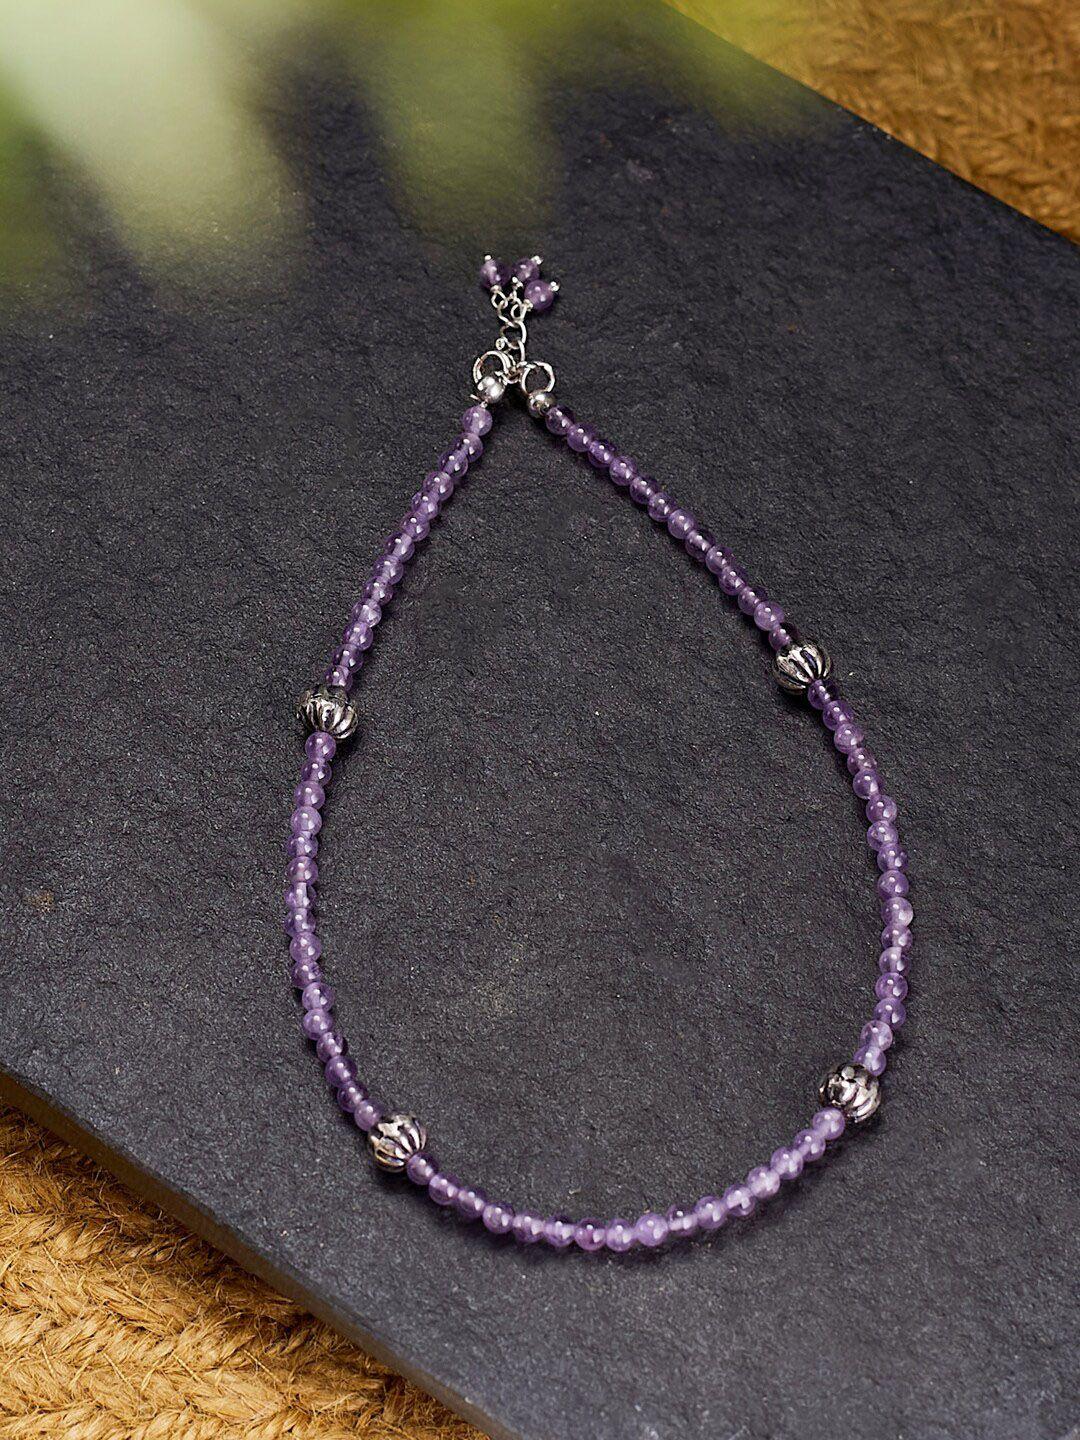 fabindia-silver-plated-amethyst-beaded-anklet